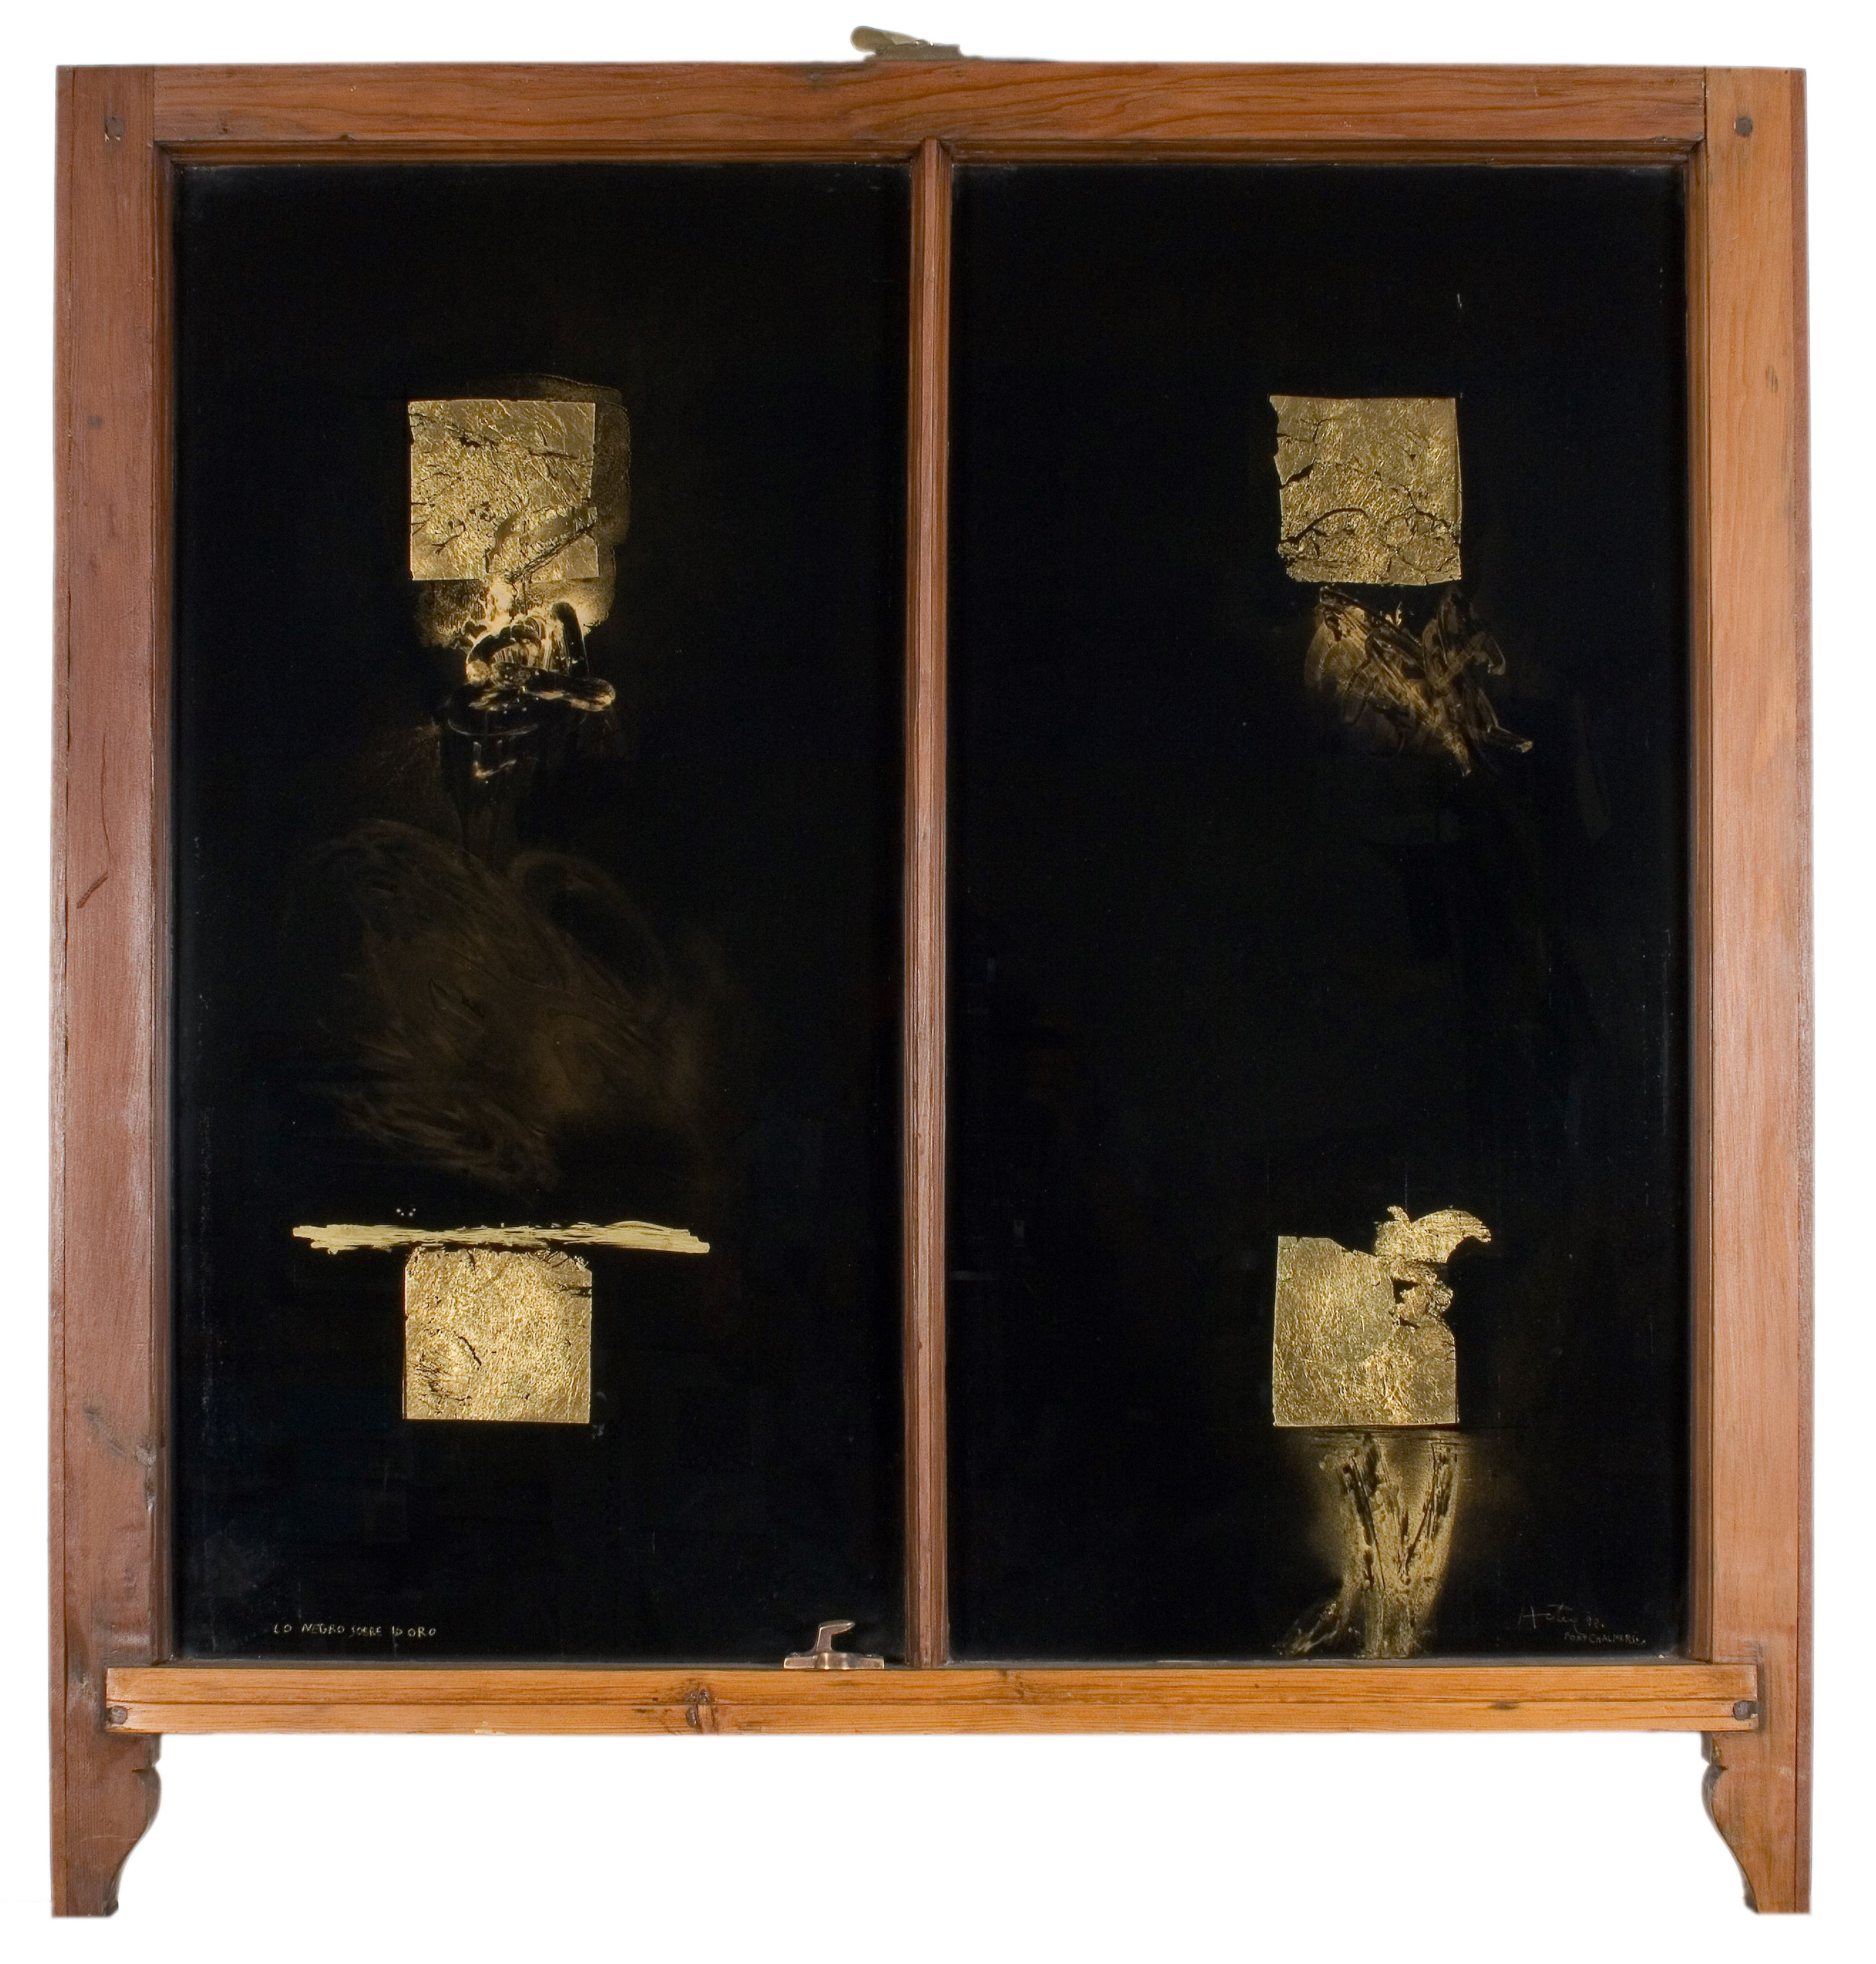 <p><strong>Ralph Hotere</strong><br />
<em>Lo negro sobre lo oro</em> 1992<br />
Auckland Art Gallery Toi o&nbsp;Tāmaki<br />
gift of the Patrons of the Gallery, 1993</p>
